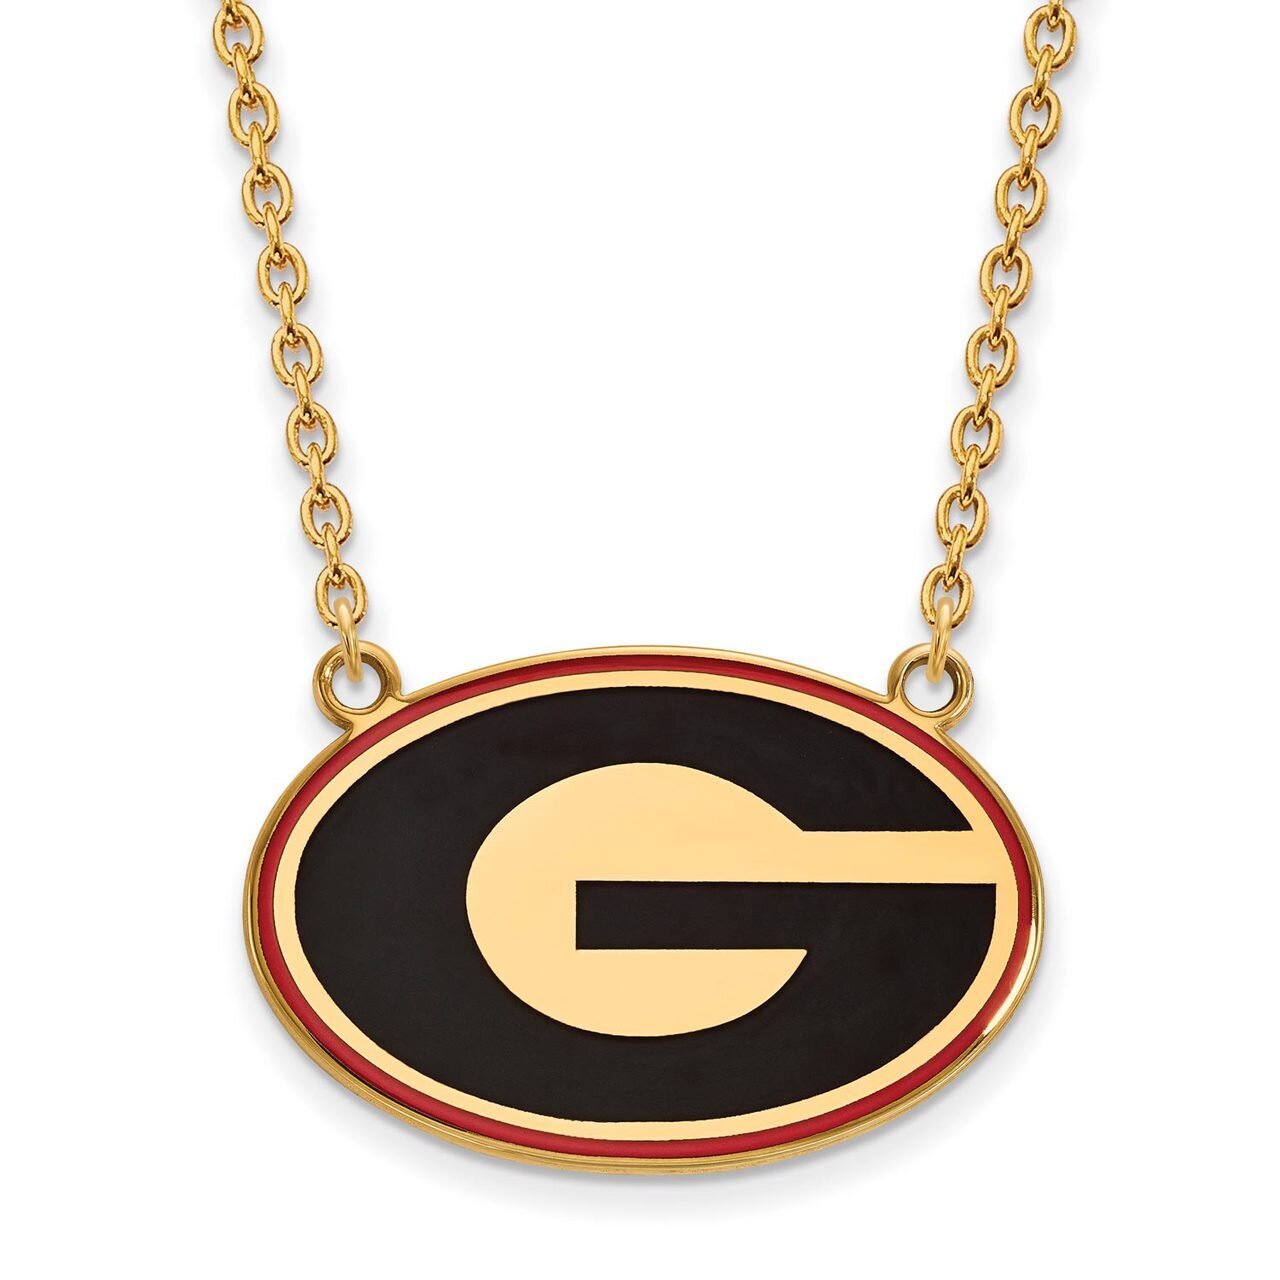 University of Georgia Large Enamel Pendant with Chain Necklace Gold-plated Silver GP083UGA-18